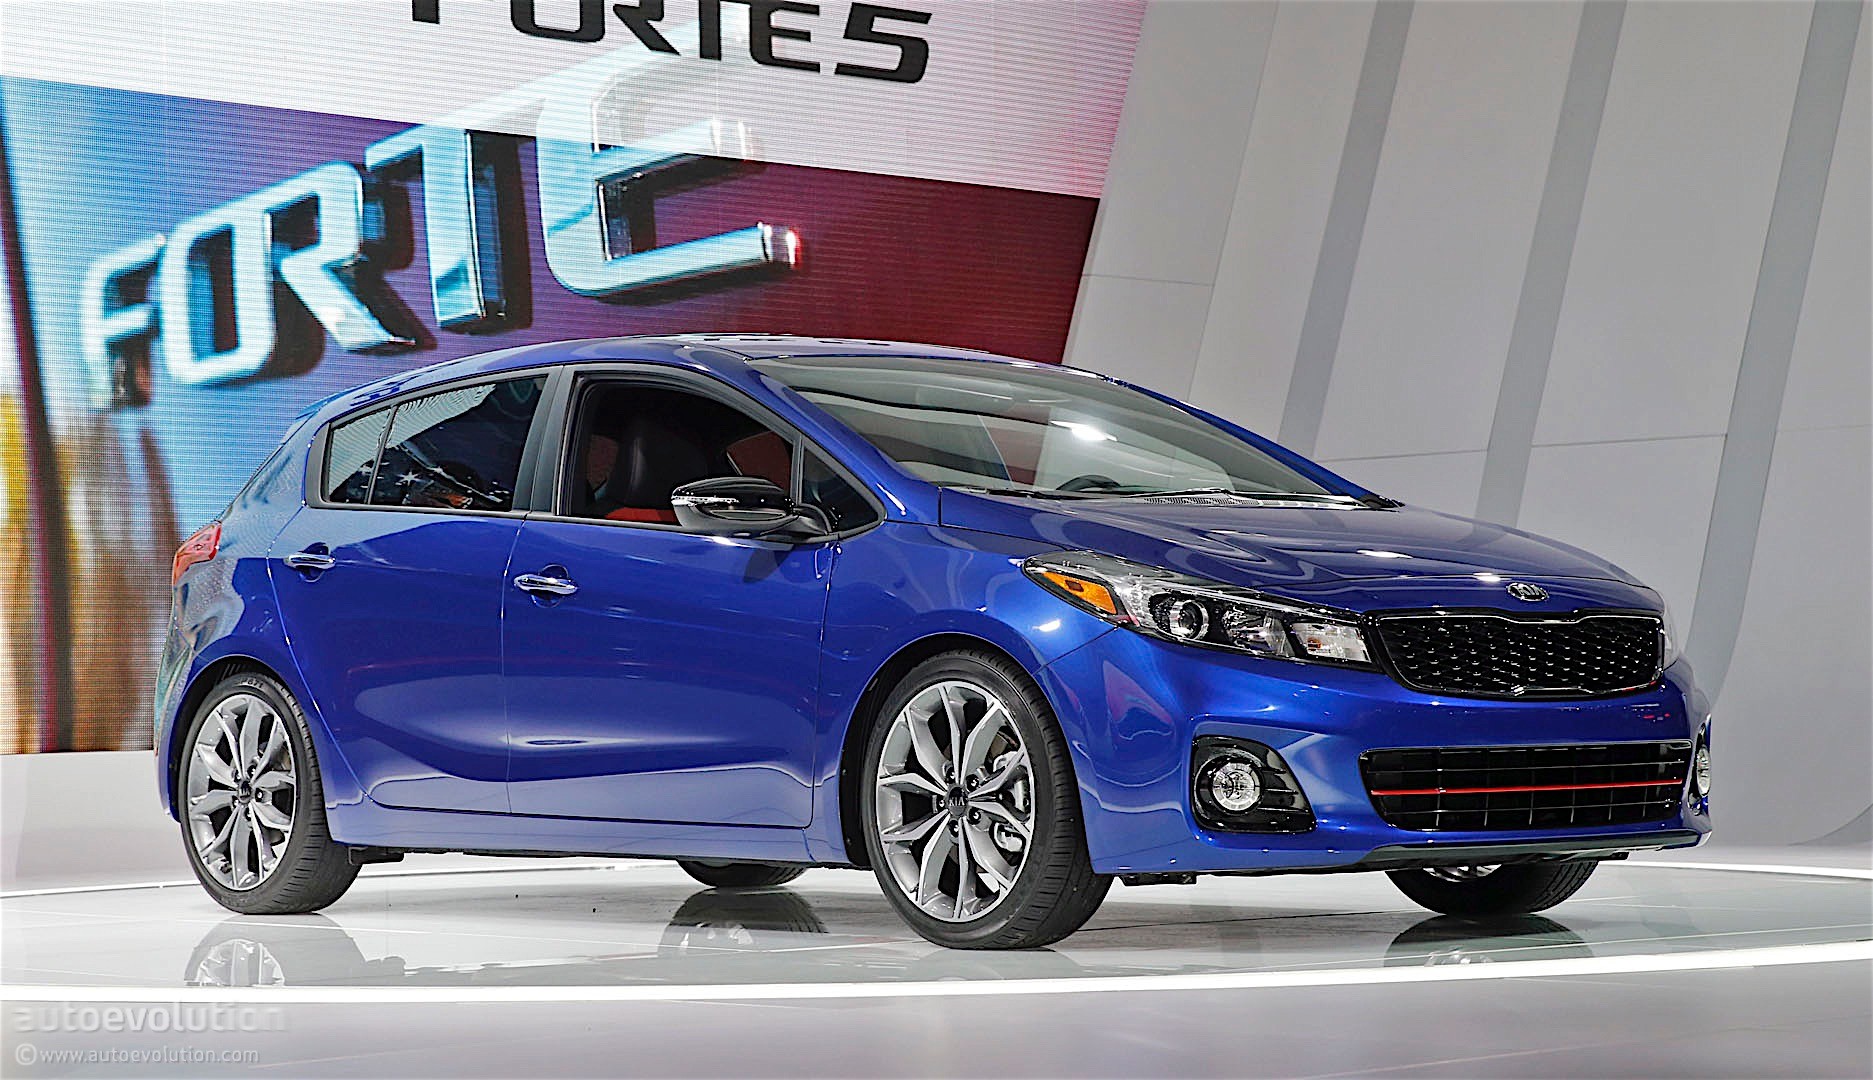 Updated Kia Forte5 Gets New Design and More Tech Features in Detroit ...